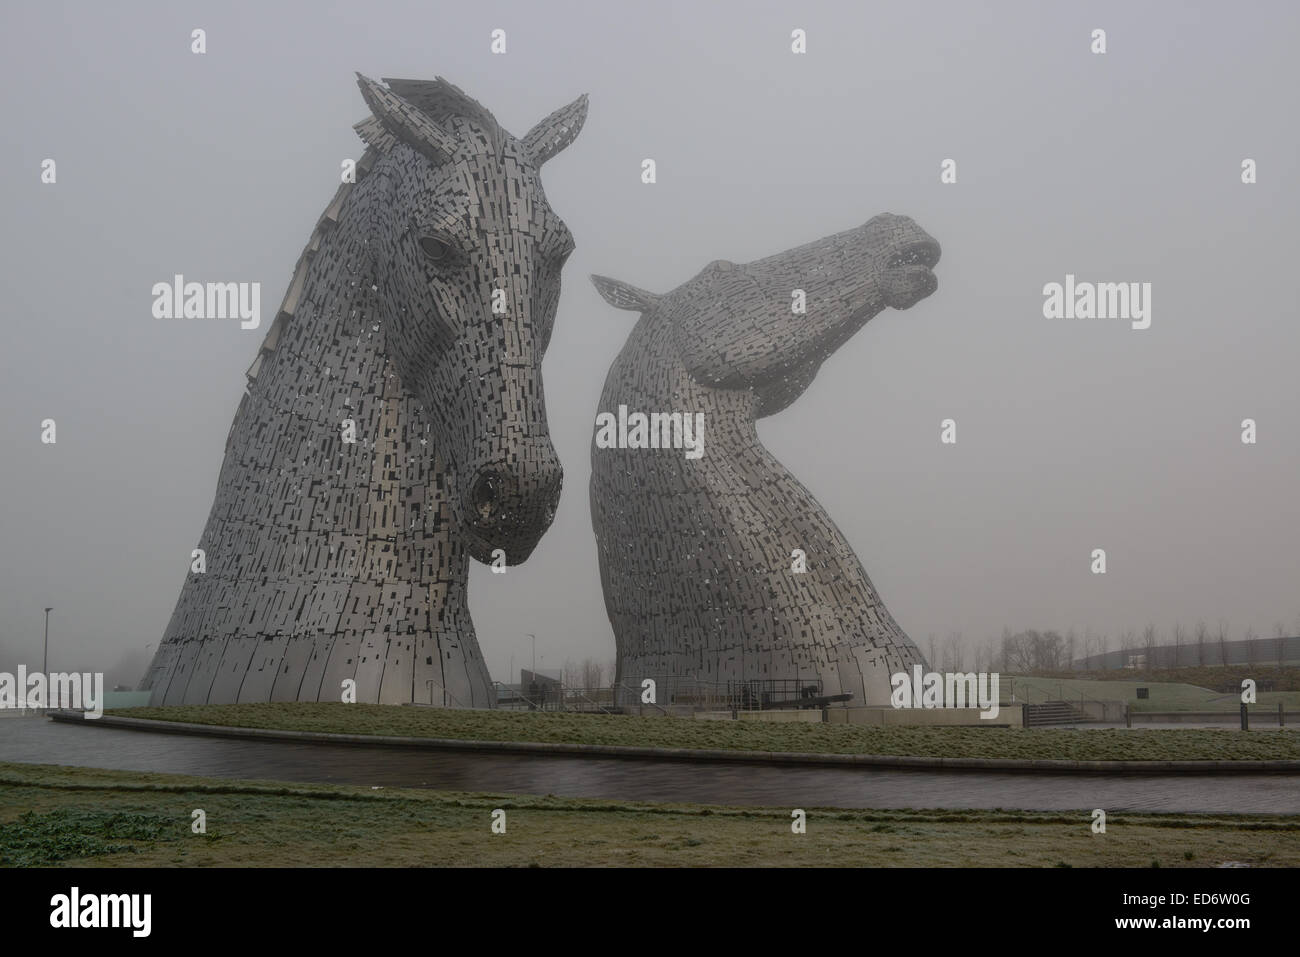 The Kelpies appear out of the freezing fog.The Kelpies are 30 metre high horse-head sculptures,standing next to the M9 Motorway. Stock Photo